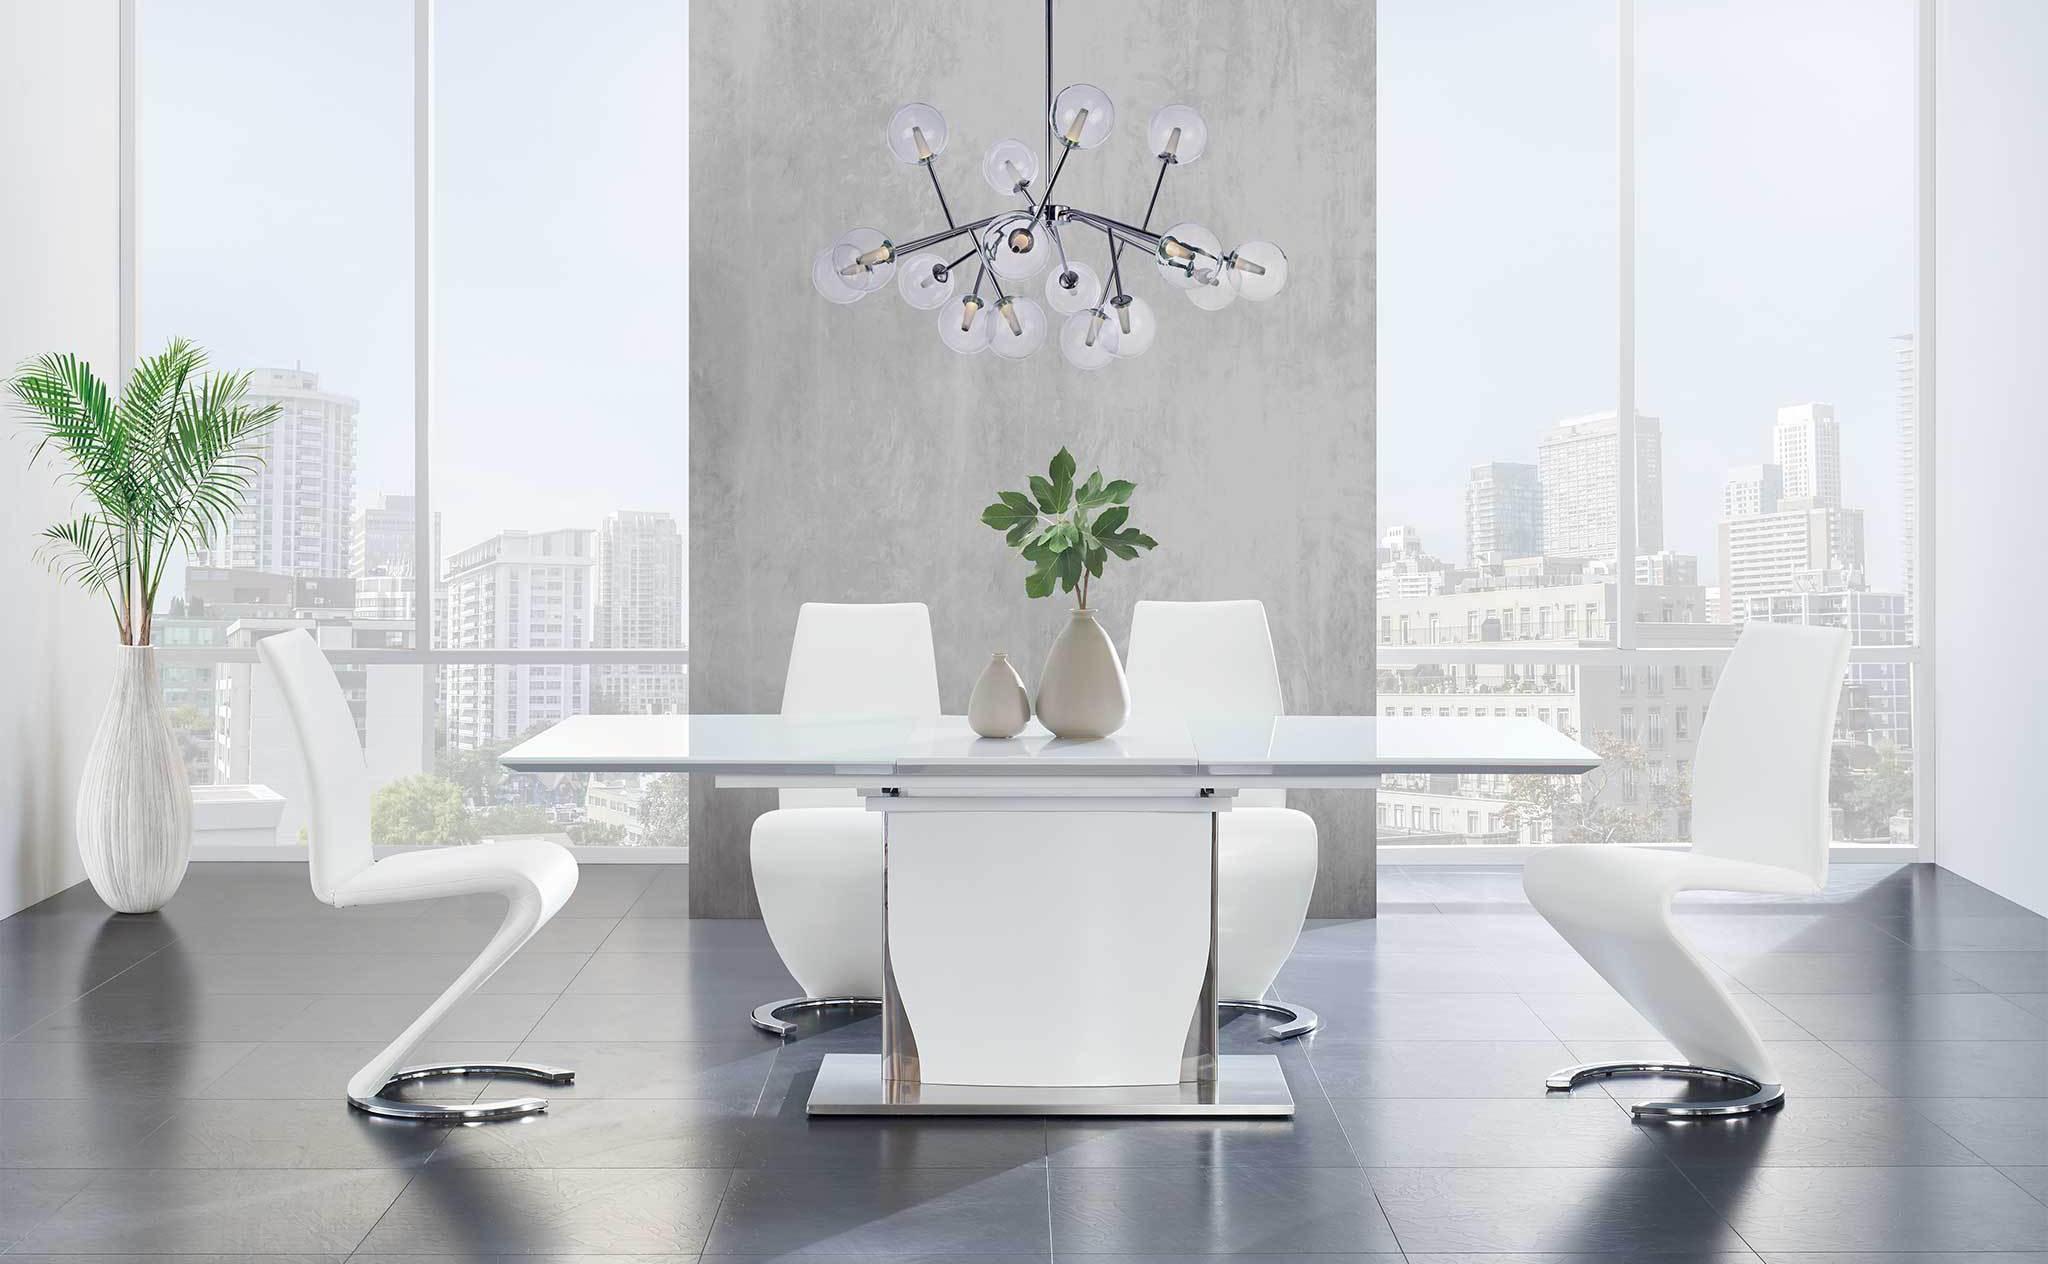 

    
D2279DT High Gloss White Finish Table & White PU Chair Dining Set 5 Pcs Global USA
